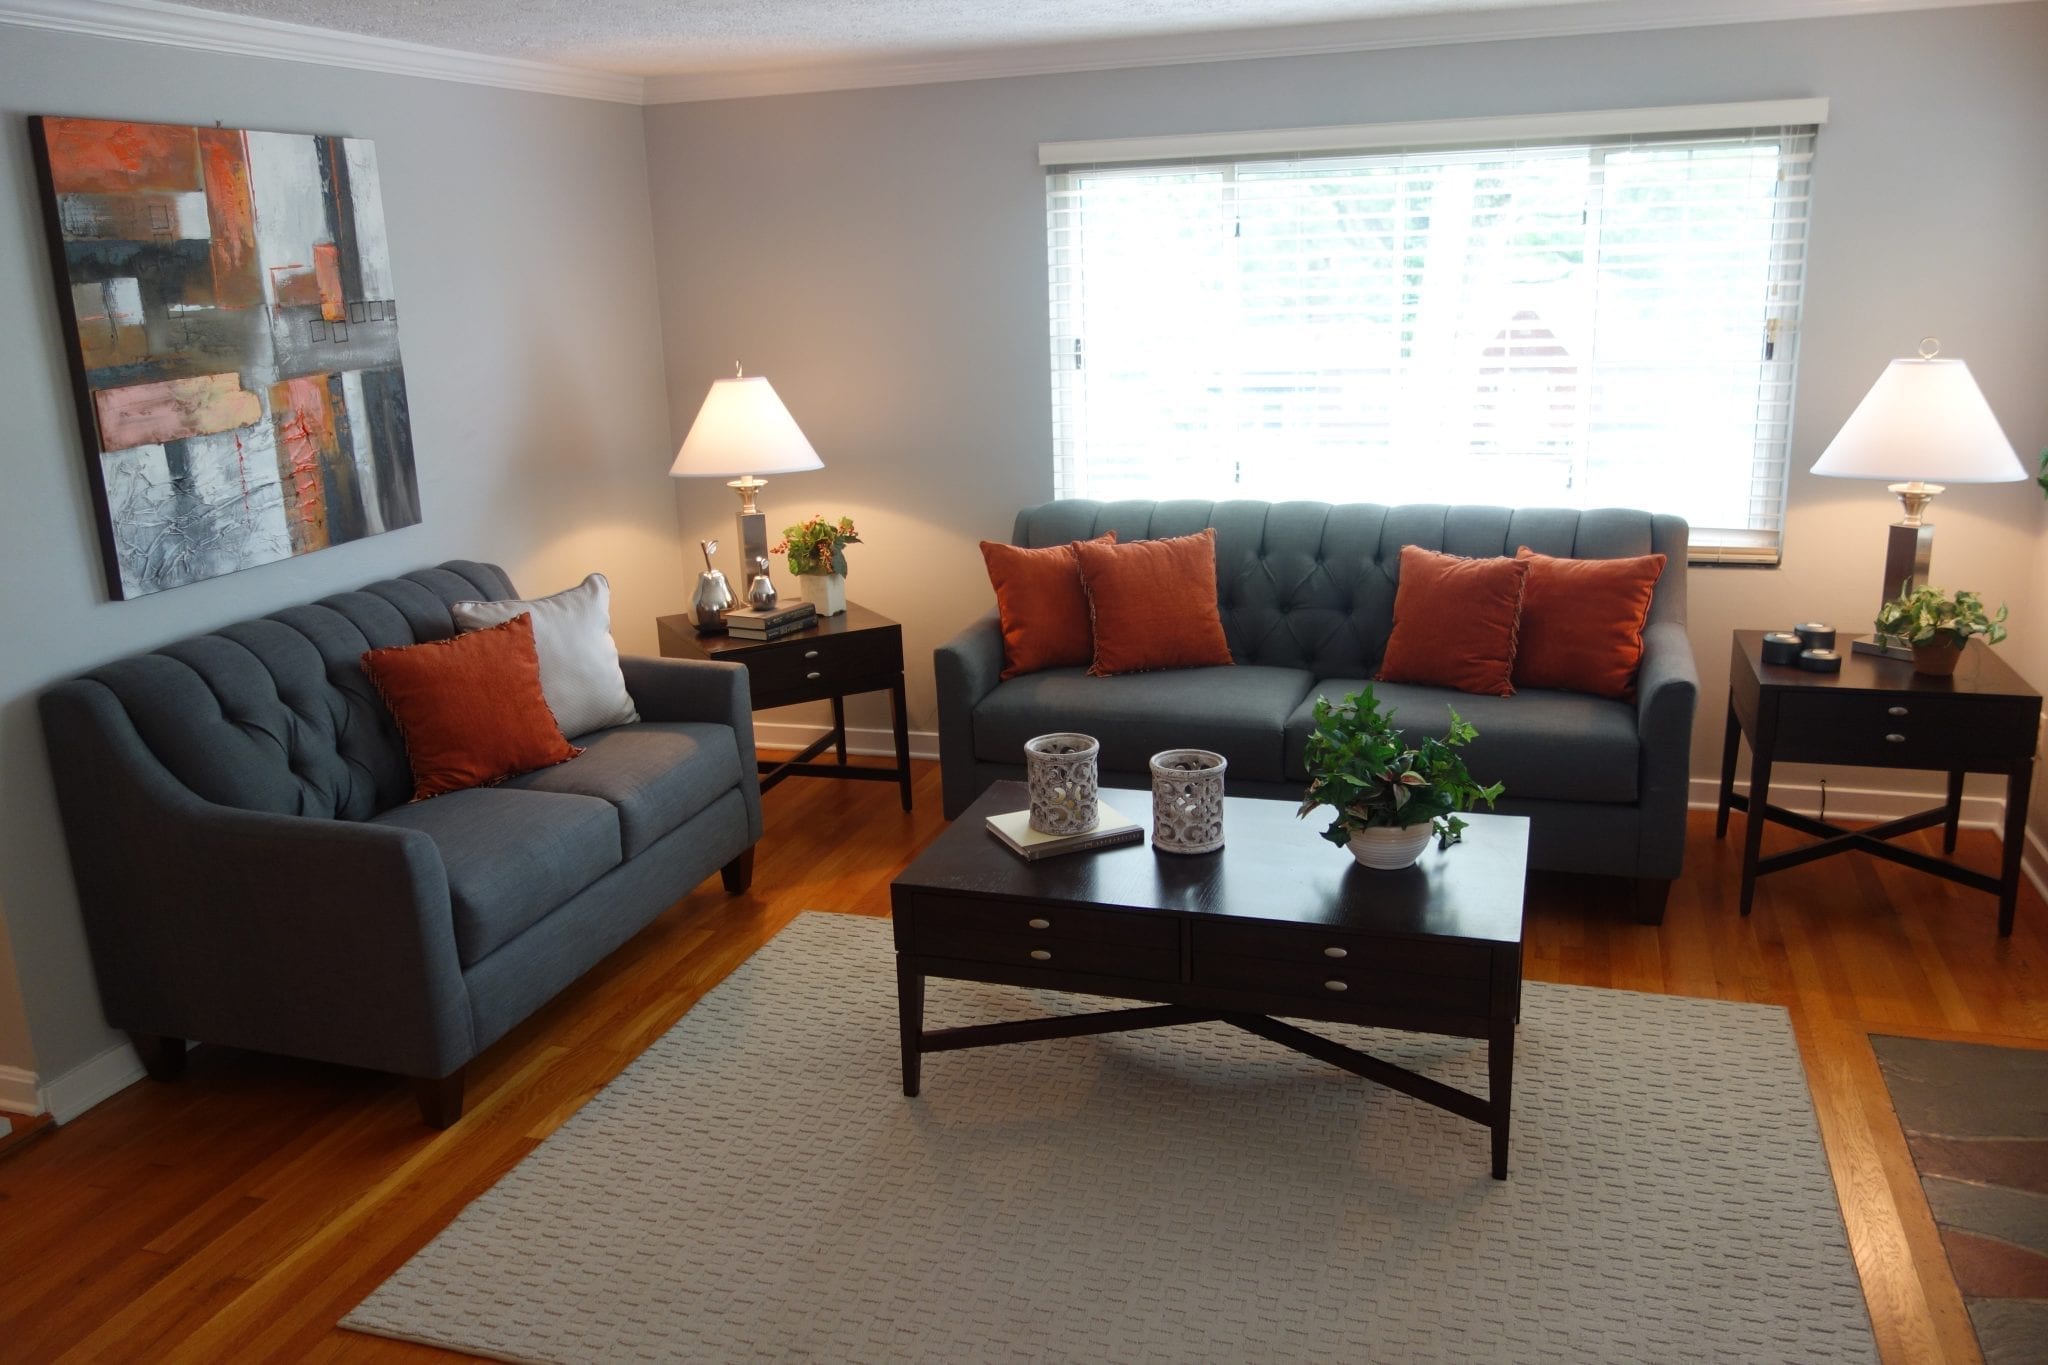 Aquantas Interiors Home Staging Services provided by Pittsburgh Furniture Leasing.